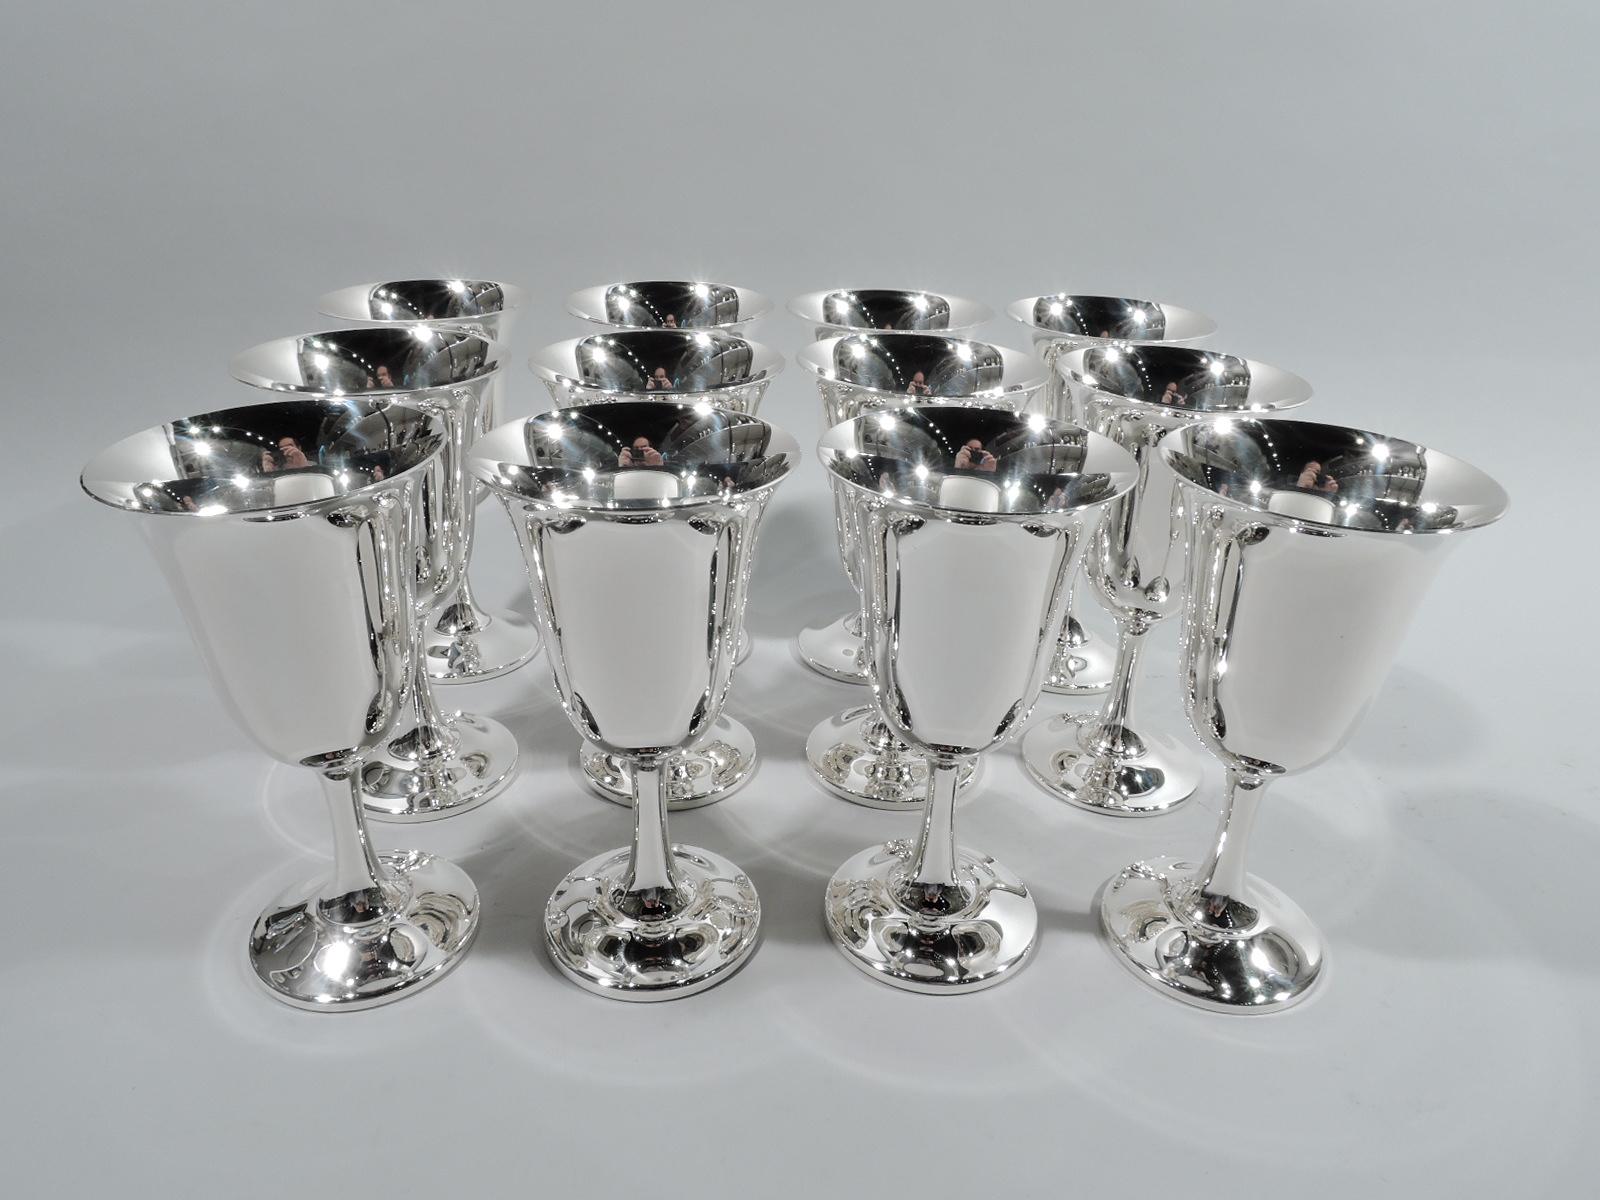 Set of 12 Modern sterling silver goblets. Made by Wallace in Wallingford, Conn. Each: Bell-form bowl with upward tapering stem and round and raised foot. A classic design that make’s any occasion special. Fully marked including maker’s stamp and no.